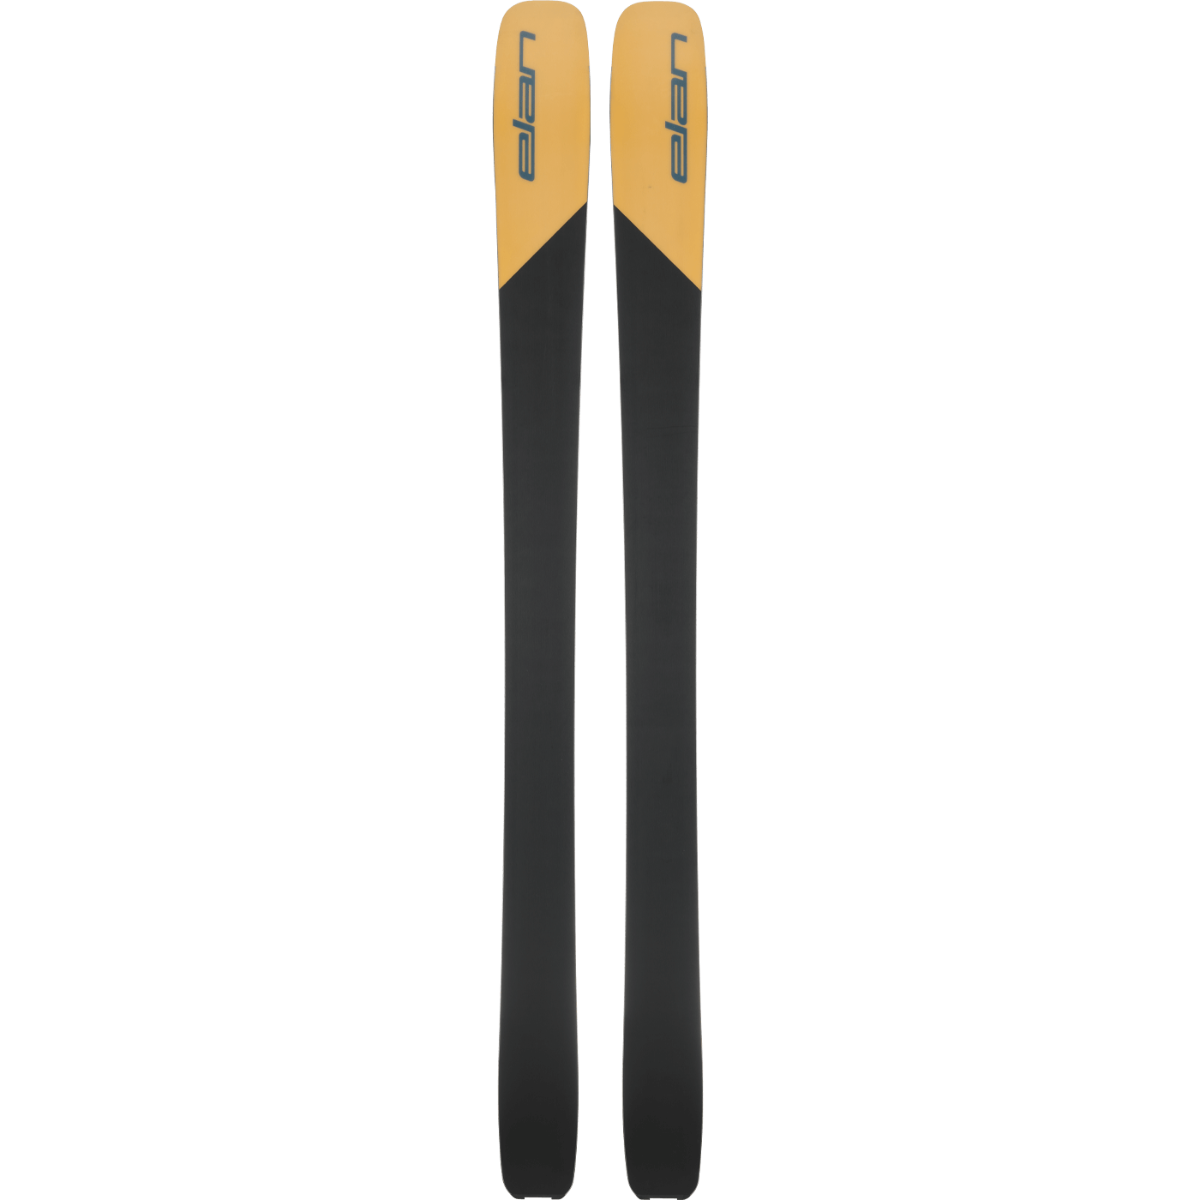 Better Deep Snow Performance Excellent Flotation Powerful Edge Grip Smooth Turn Entry & Exit Playful & Power Rebound High speed stability in all turn shapes